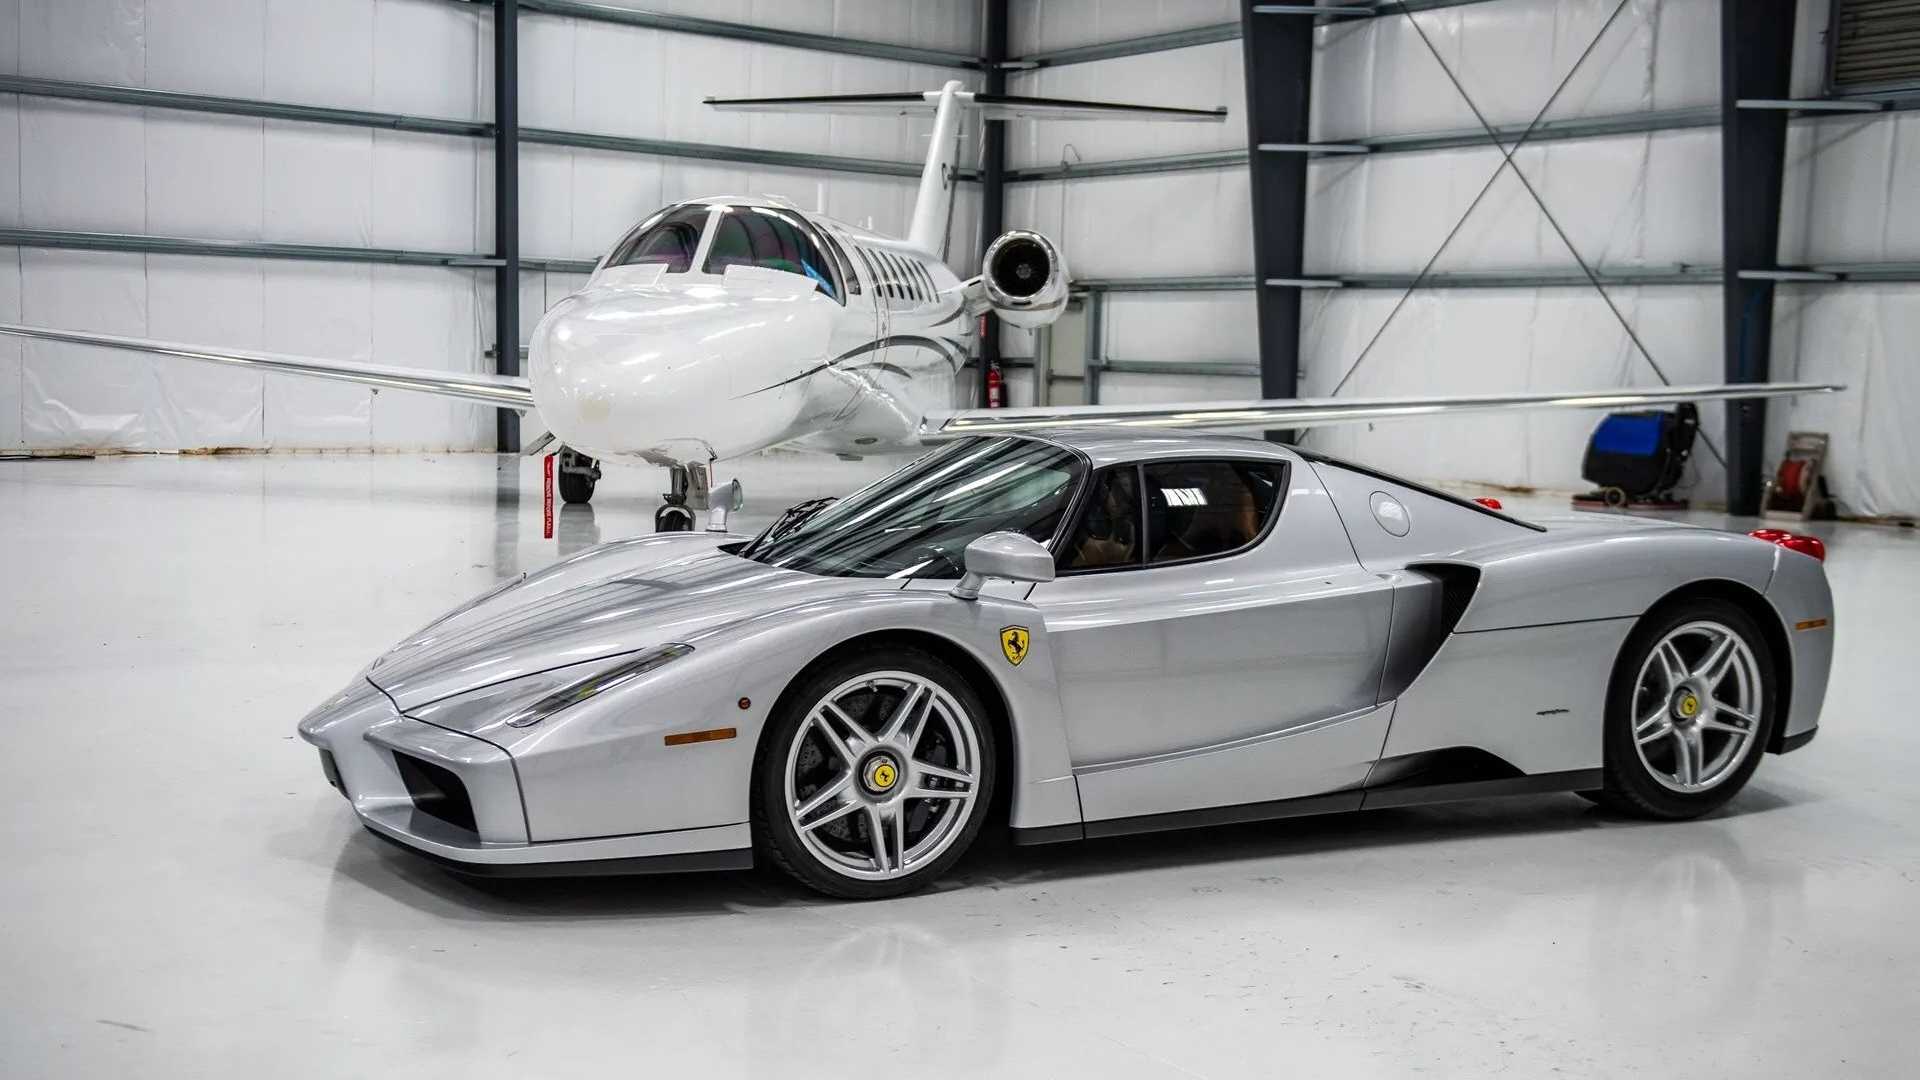 Ferrari Enzo With Rare Body Color, Only 141 Miles For Sale In Canada